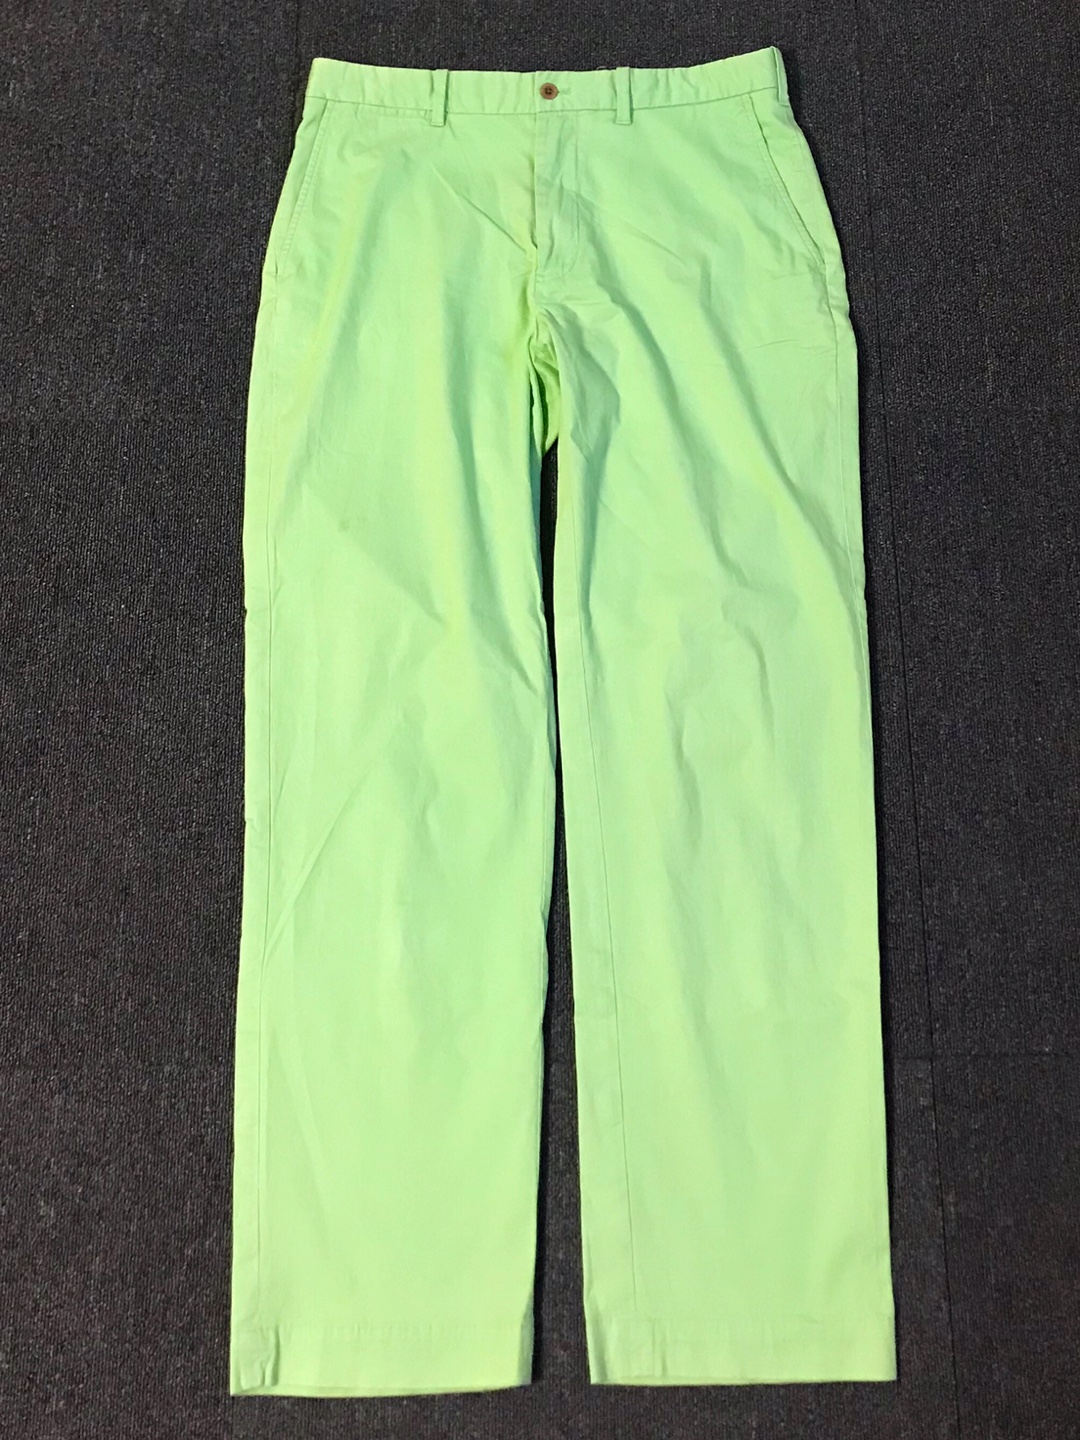 Polo golf neon green lightweight cotton stretch pants (32/32 size,